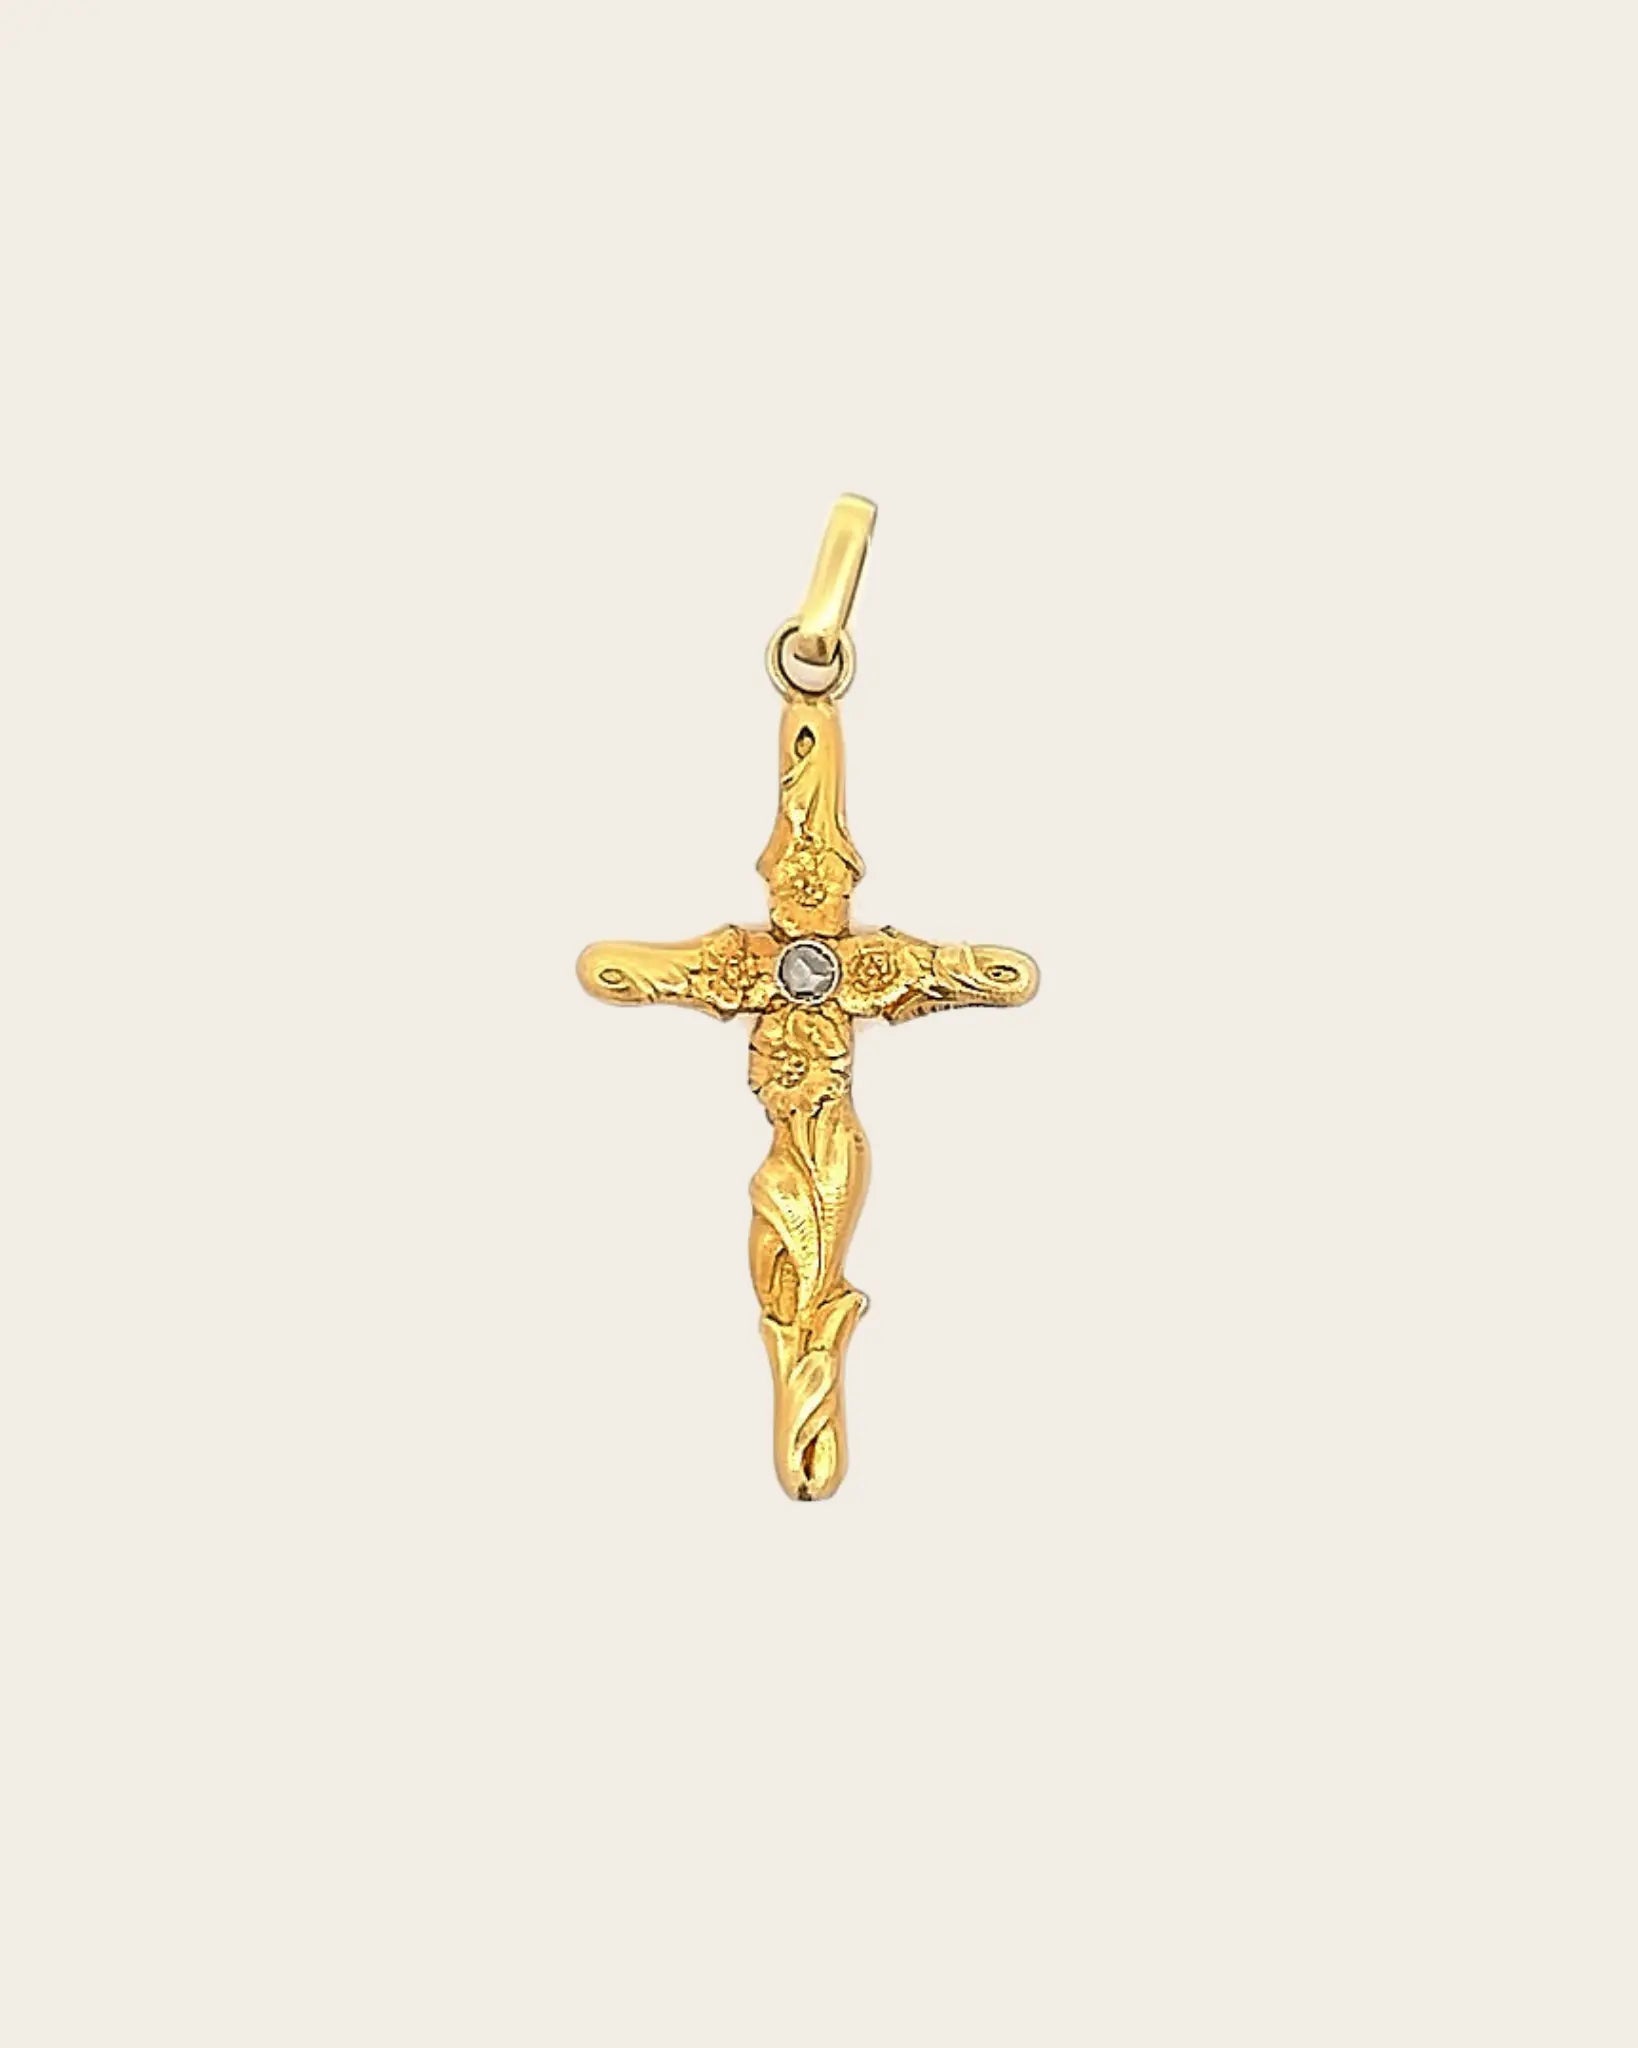 1900s Diamond Cross Pendant 1900s Diamond Cross Pendant Vintage at the Squash Blossom Vintage at the Squash Blossom  Squash Blossom Vail